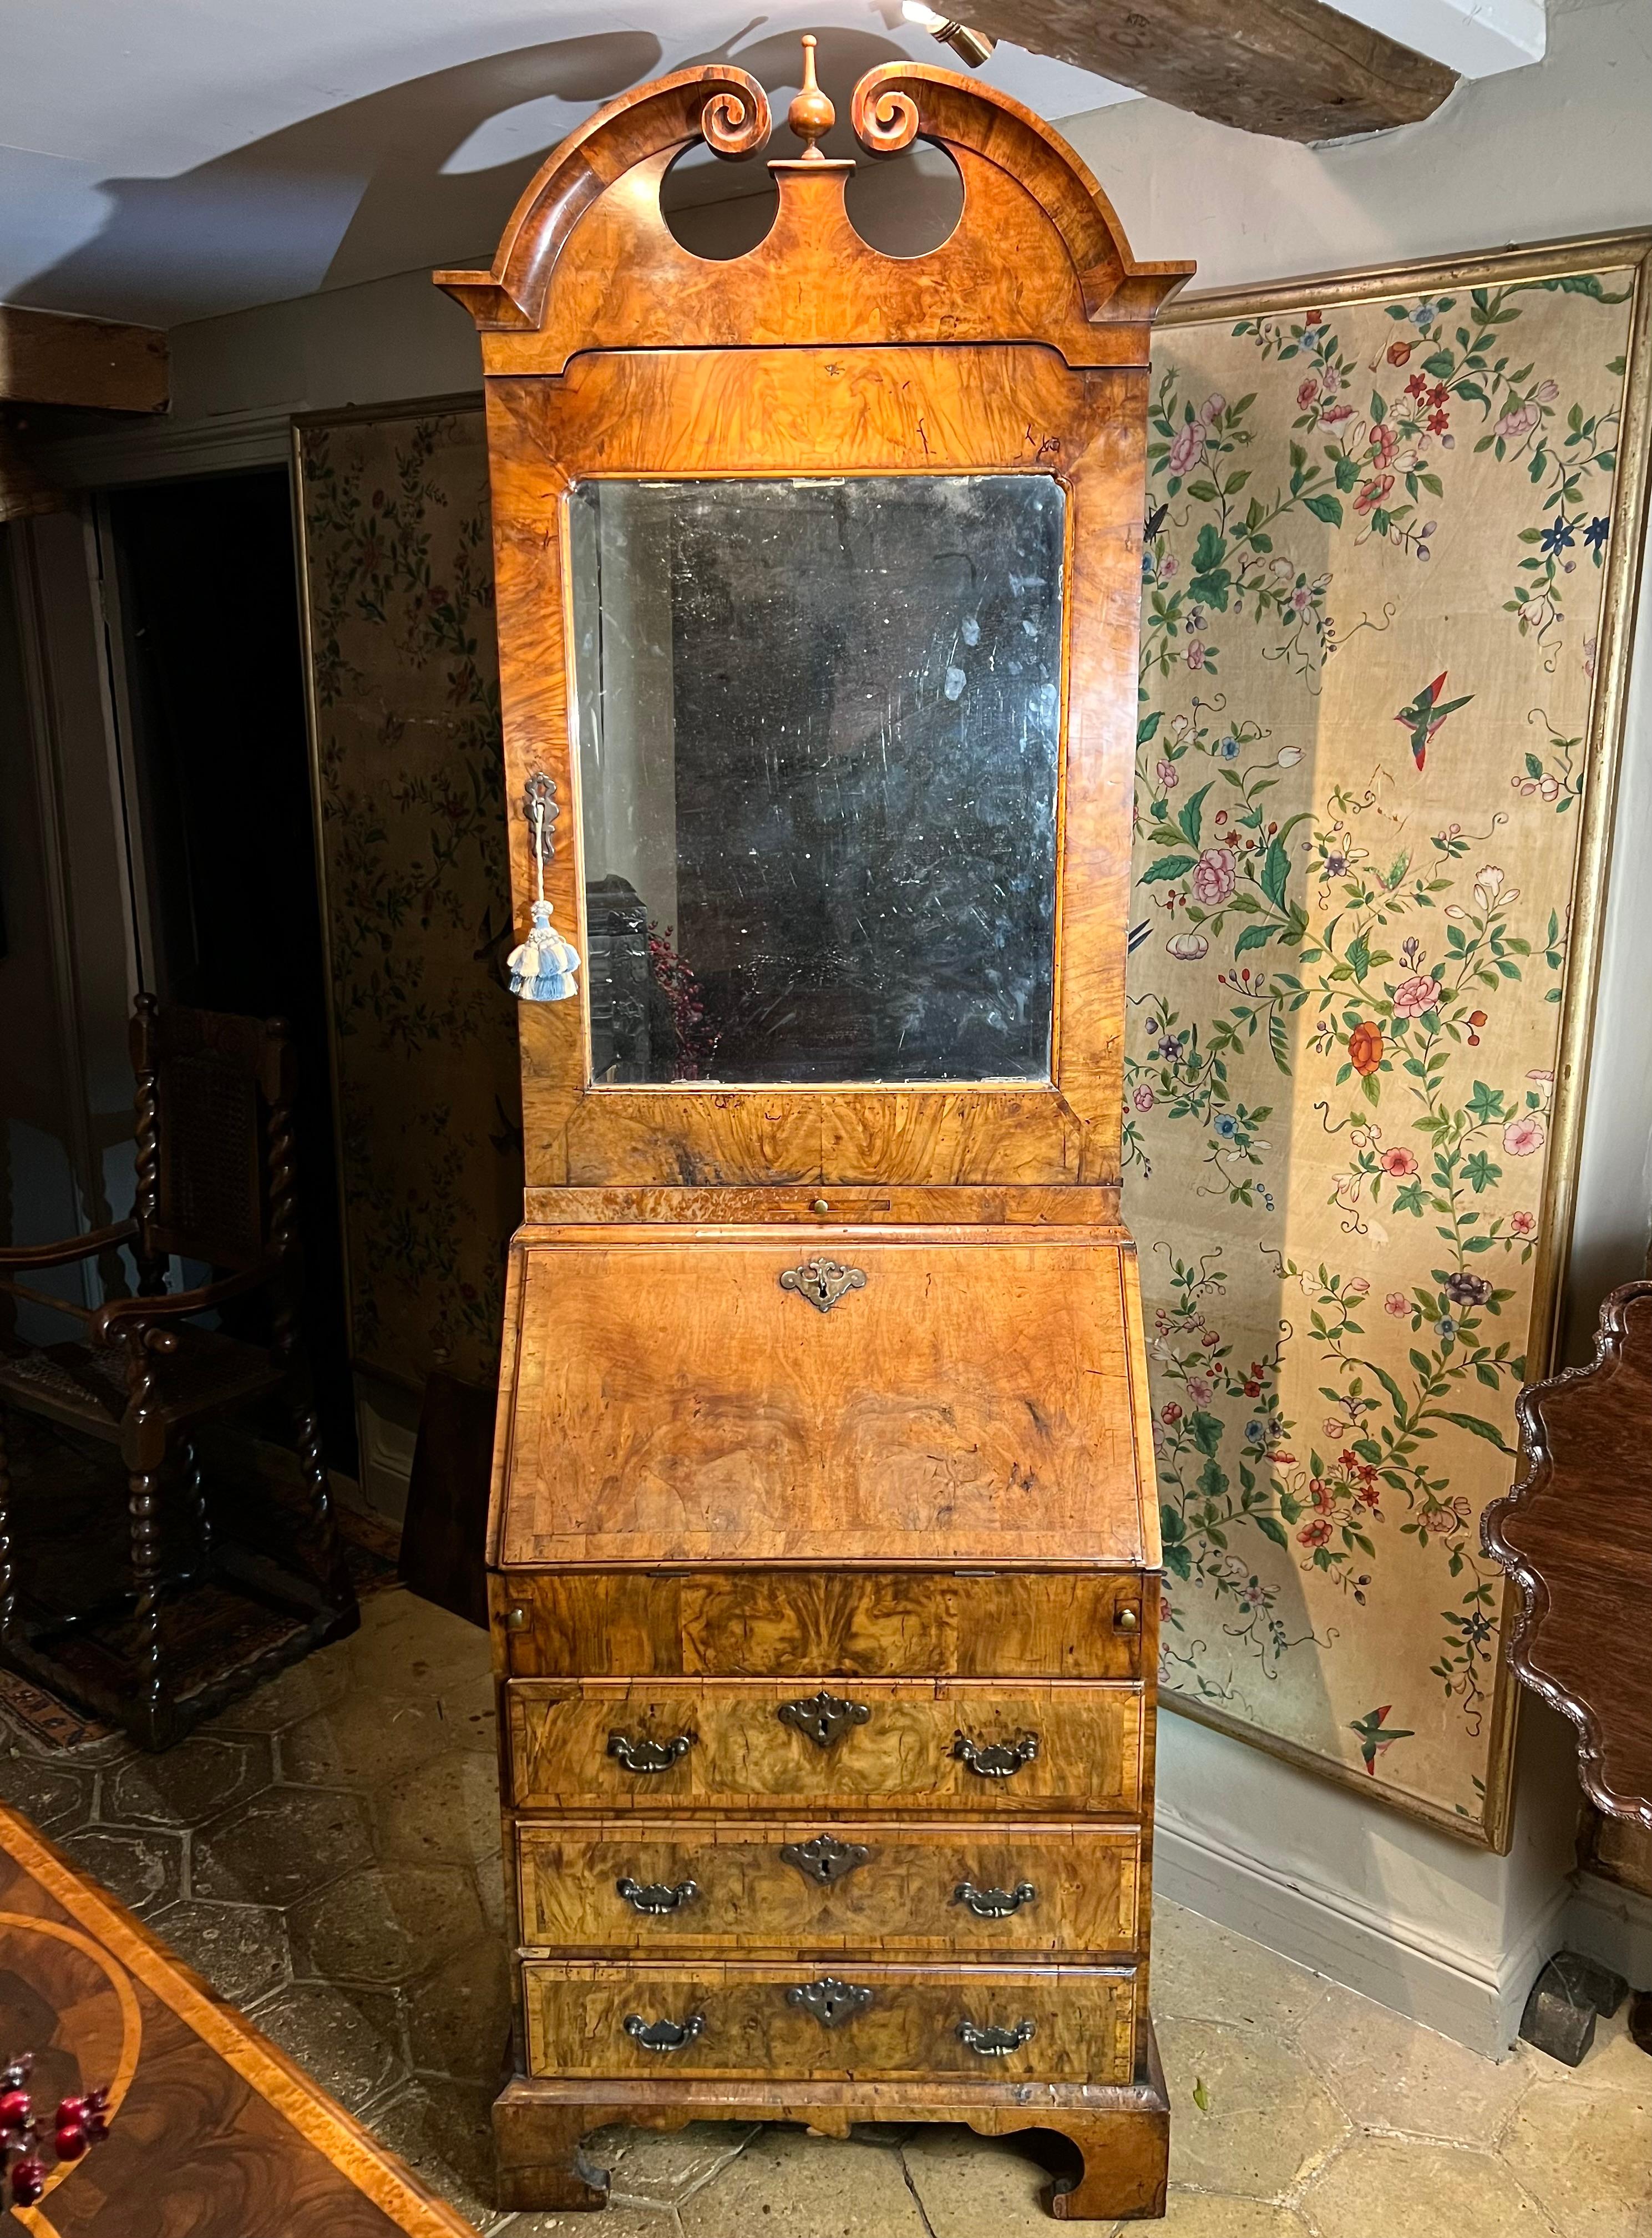 A rare, small, English George I / II- period walnut bureau bookcase/ cabinet with a moulded swan-neck pediment. Circa 1727-1730.

The bevelled mirror plate has a candle slide below.
The lower writing section behind the fall reveals a fitted interior